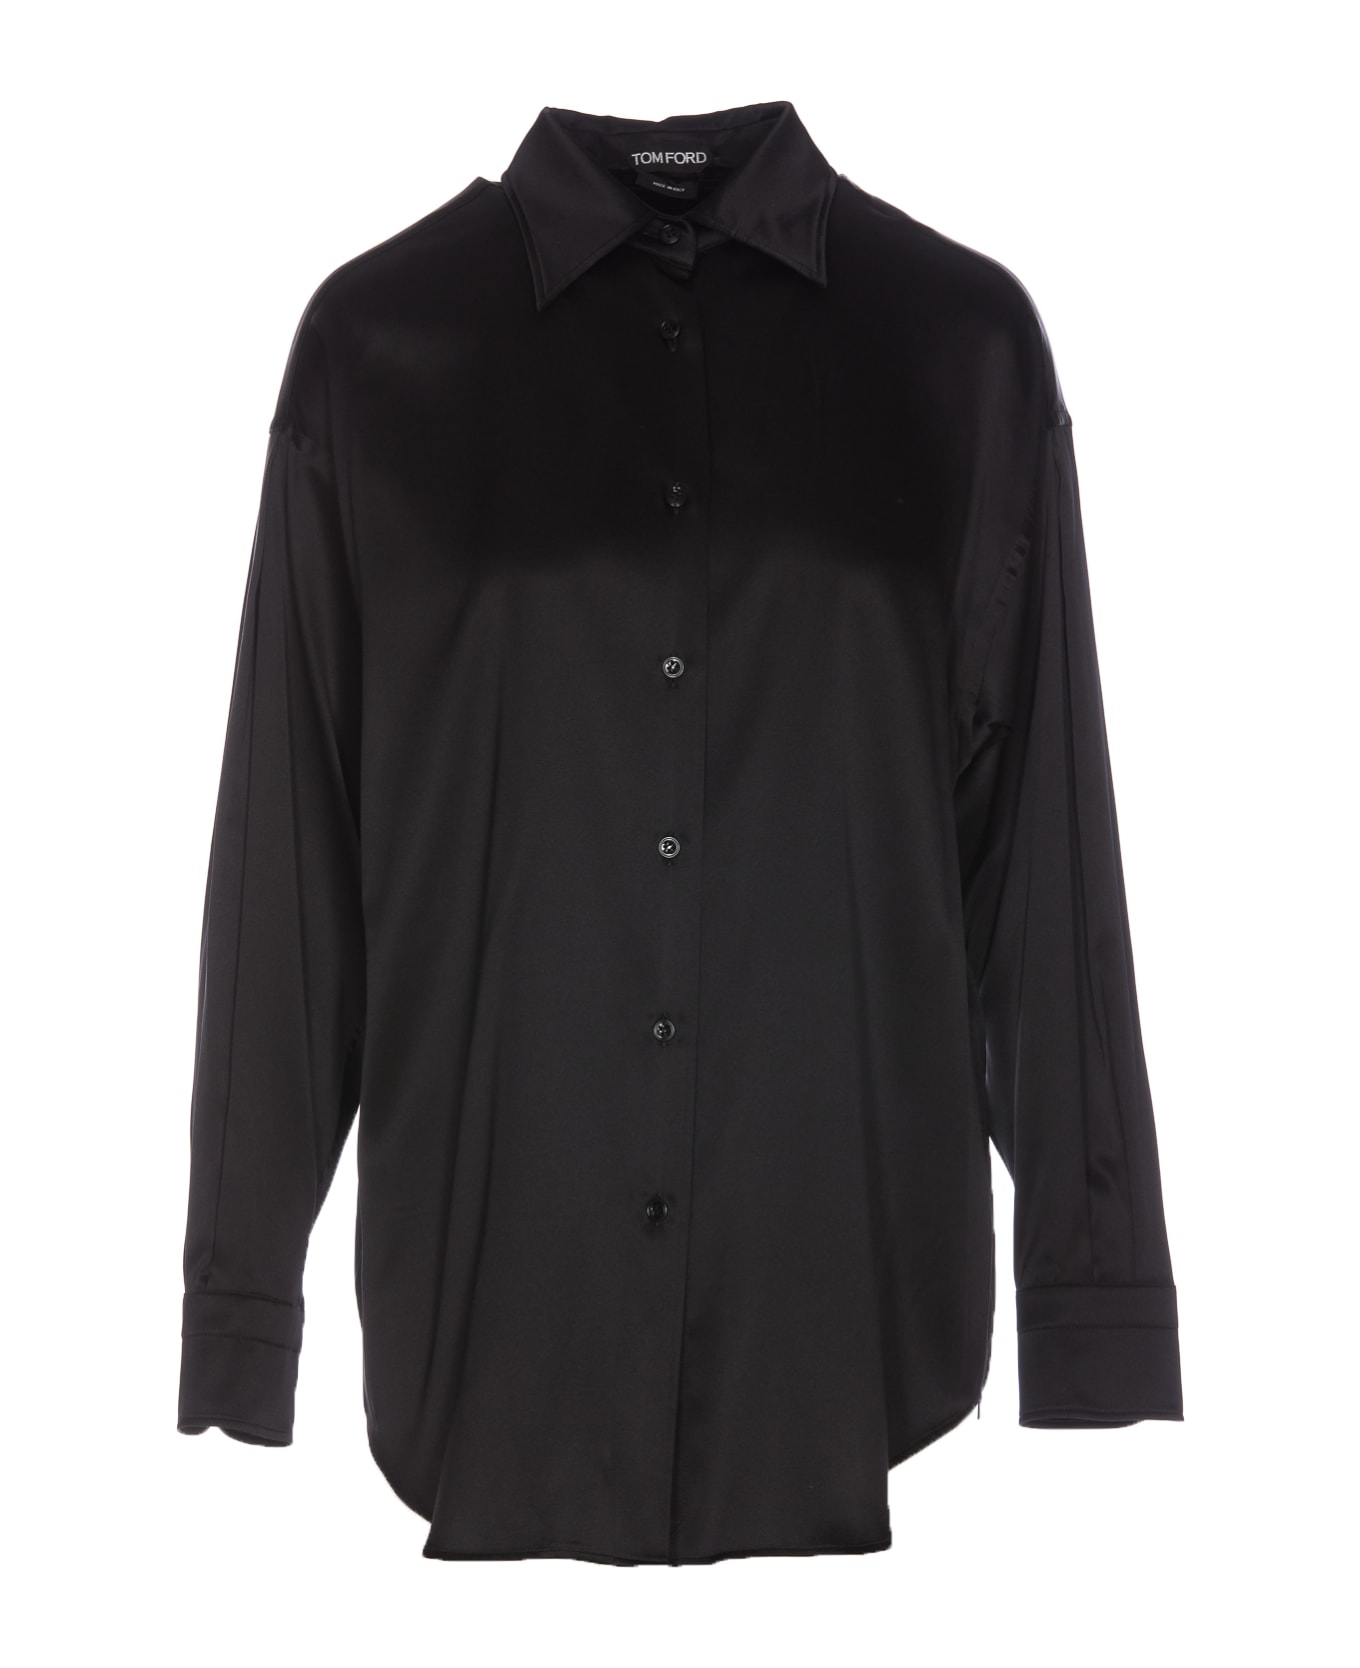 Tom Ford Stretch Silk Satin Relaxed Fit Shirt - Black